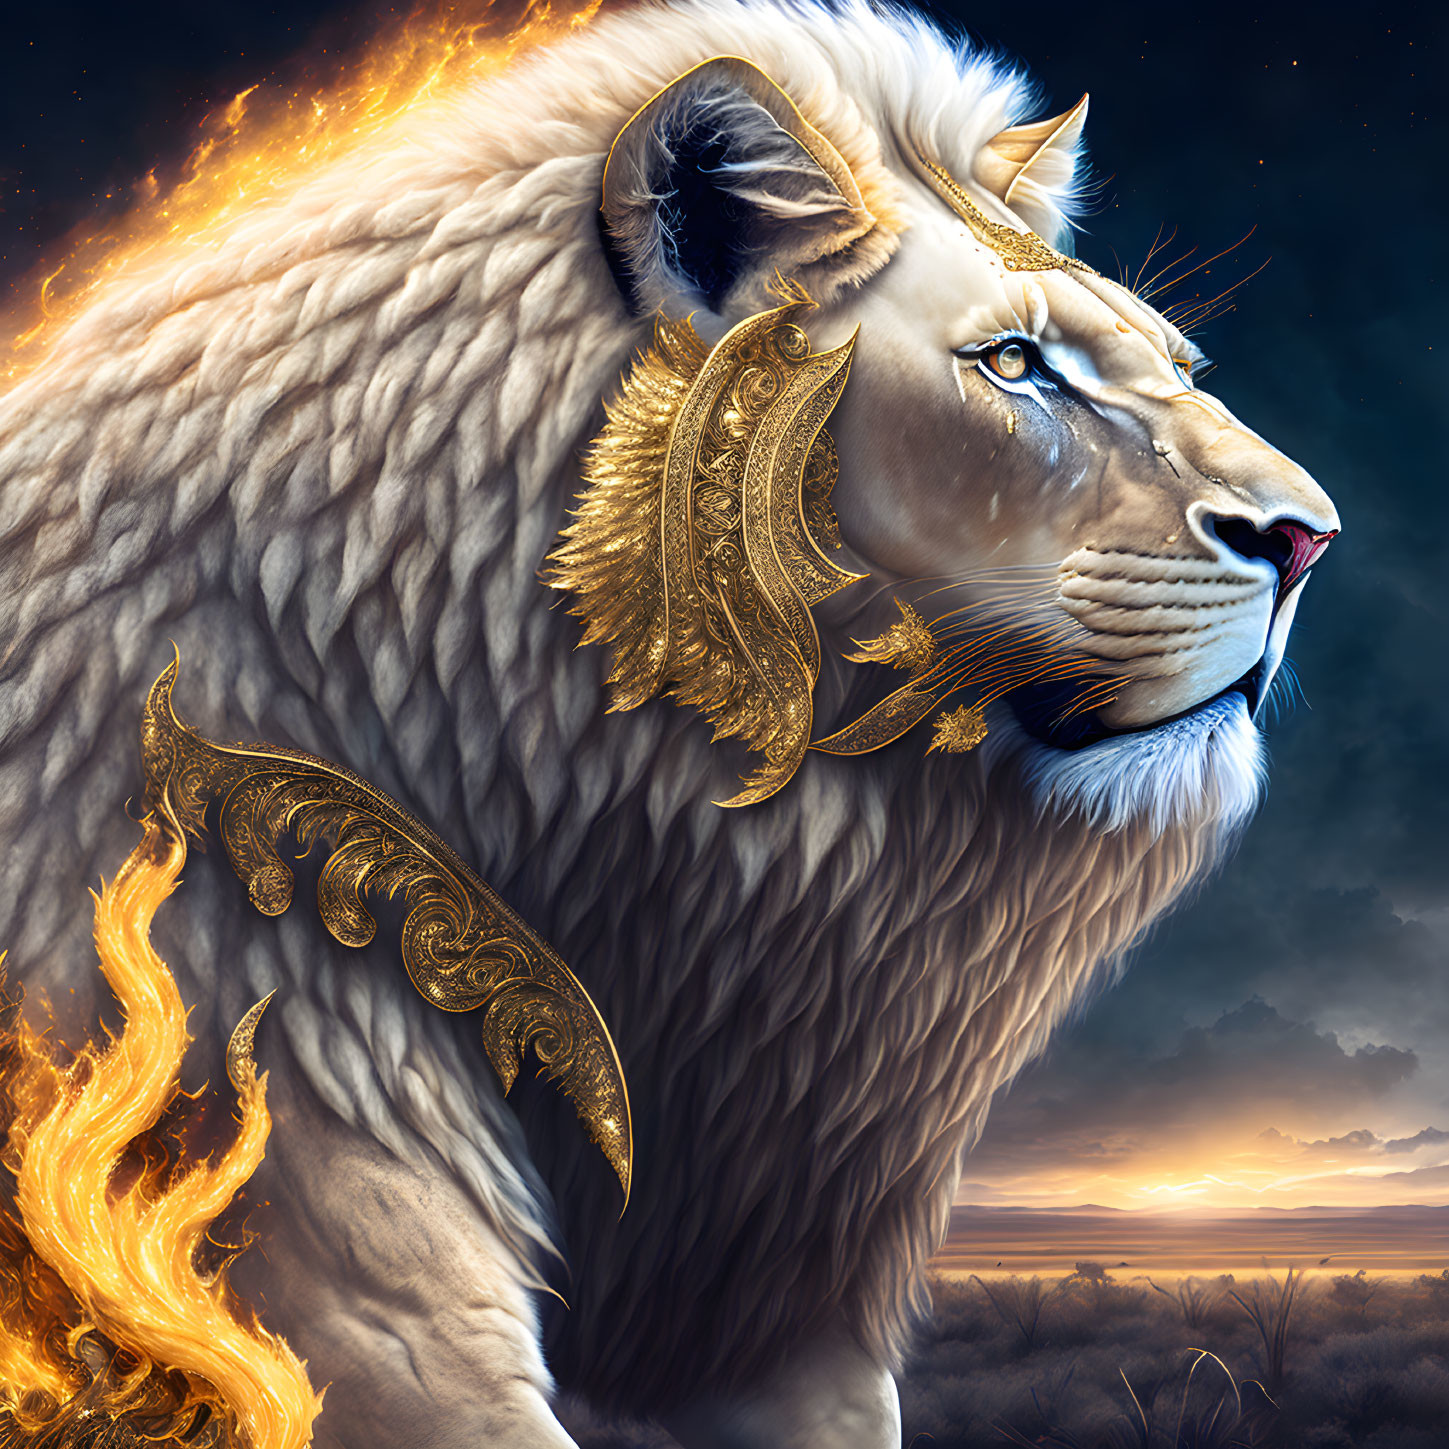 Majestic lion illustration with fiery mane and gold accents on savanna backdrop